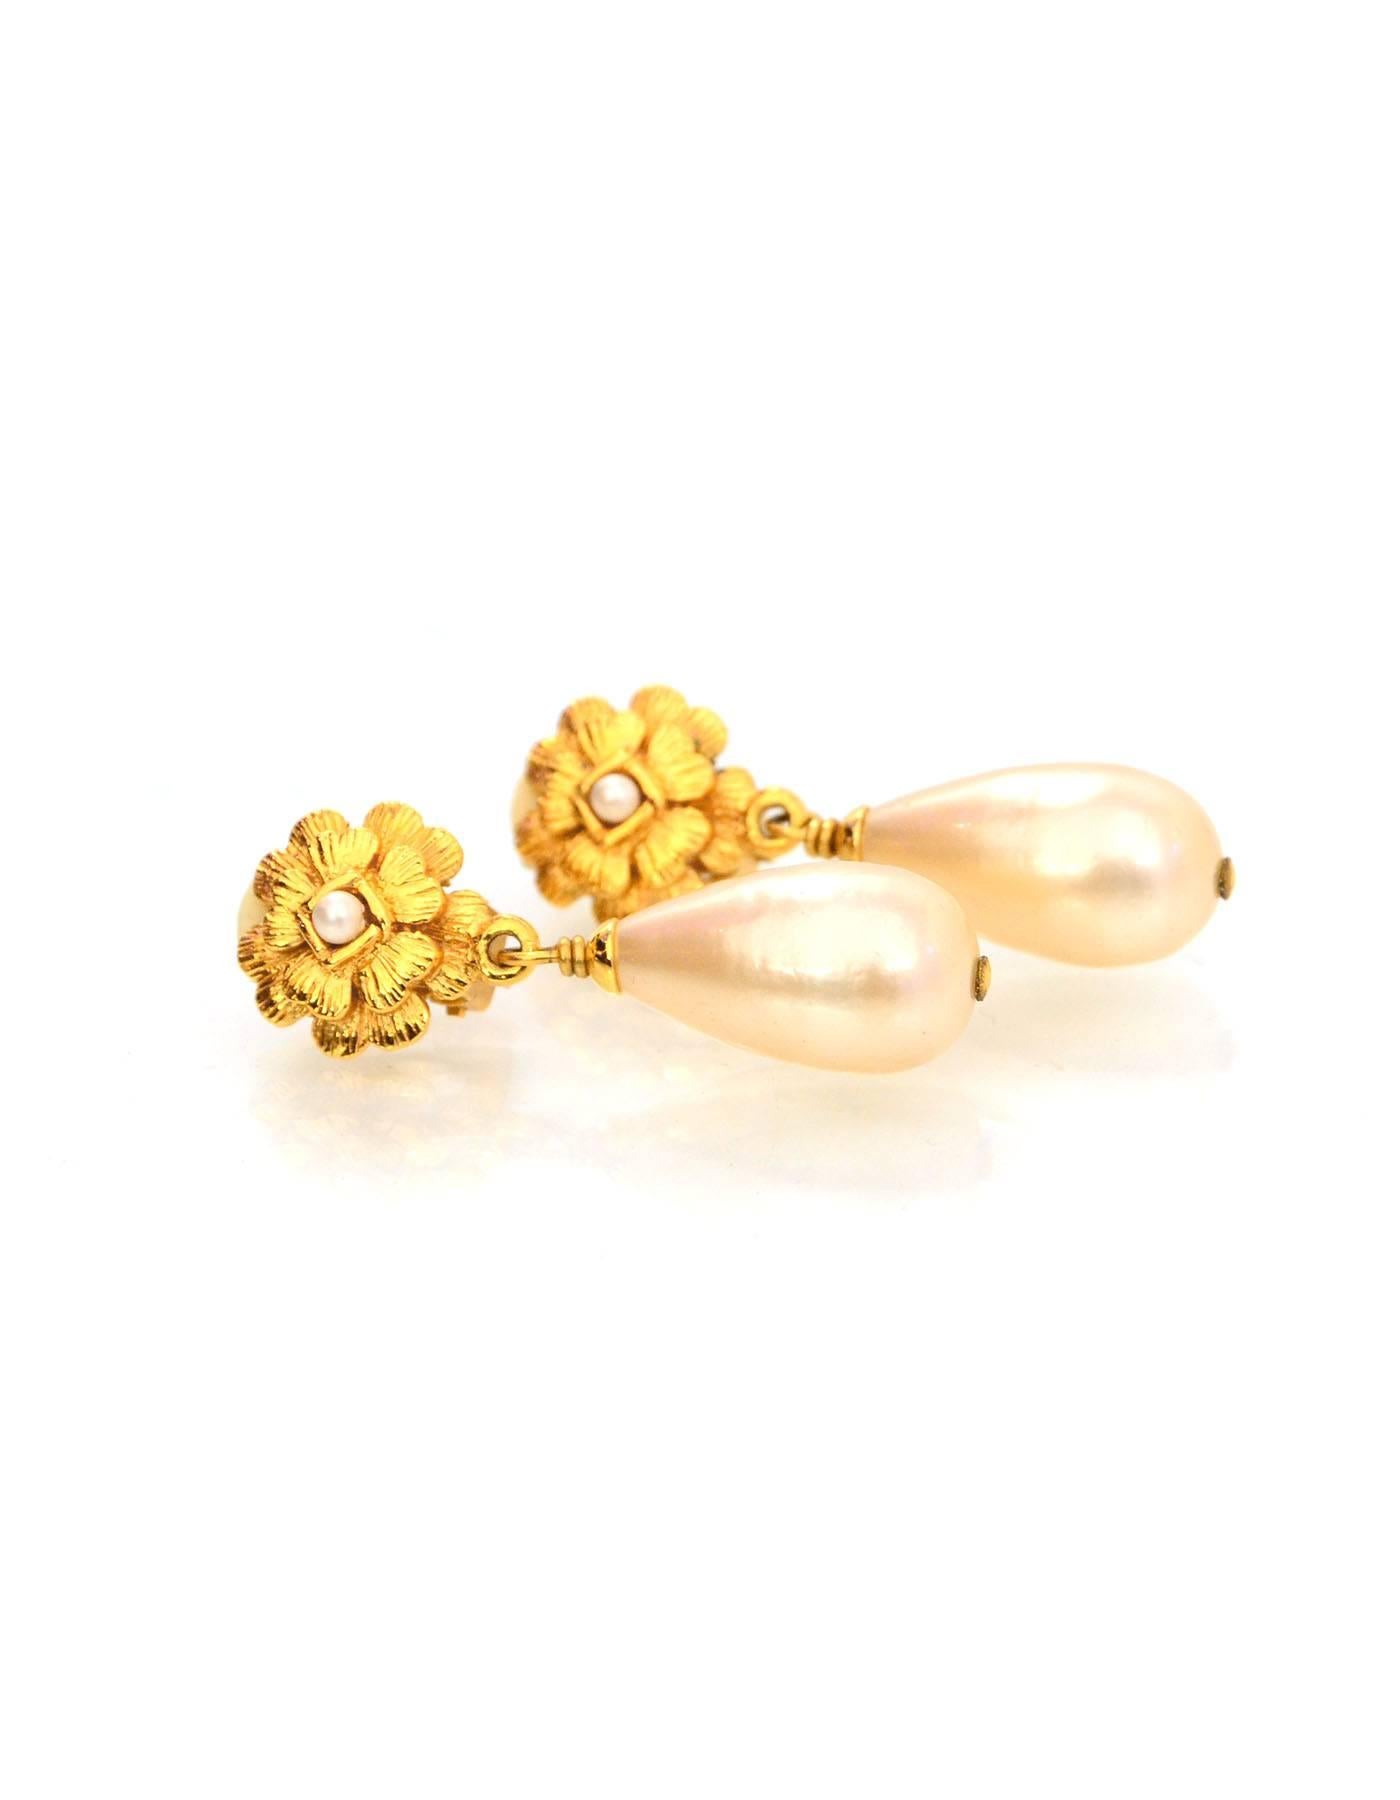 Chanel Vintage Faux Pearl Clip-On Drop Earrings
Features camellia flower

Made In: France
Year of Production: Season 29
Color: Gold and ivory
Materials: Metal and faux pearl
Stamp: Chanel 2 CC 9 Made in France
Closure: Clip on
Overall